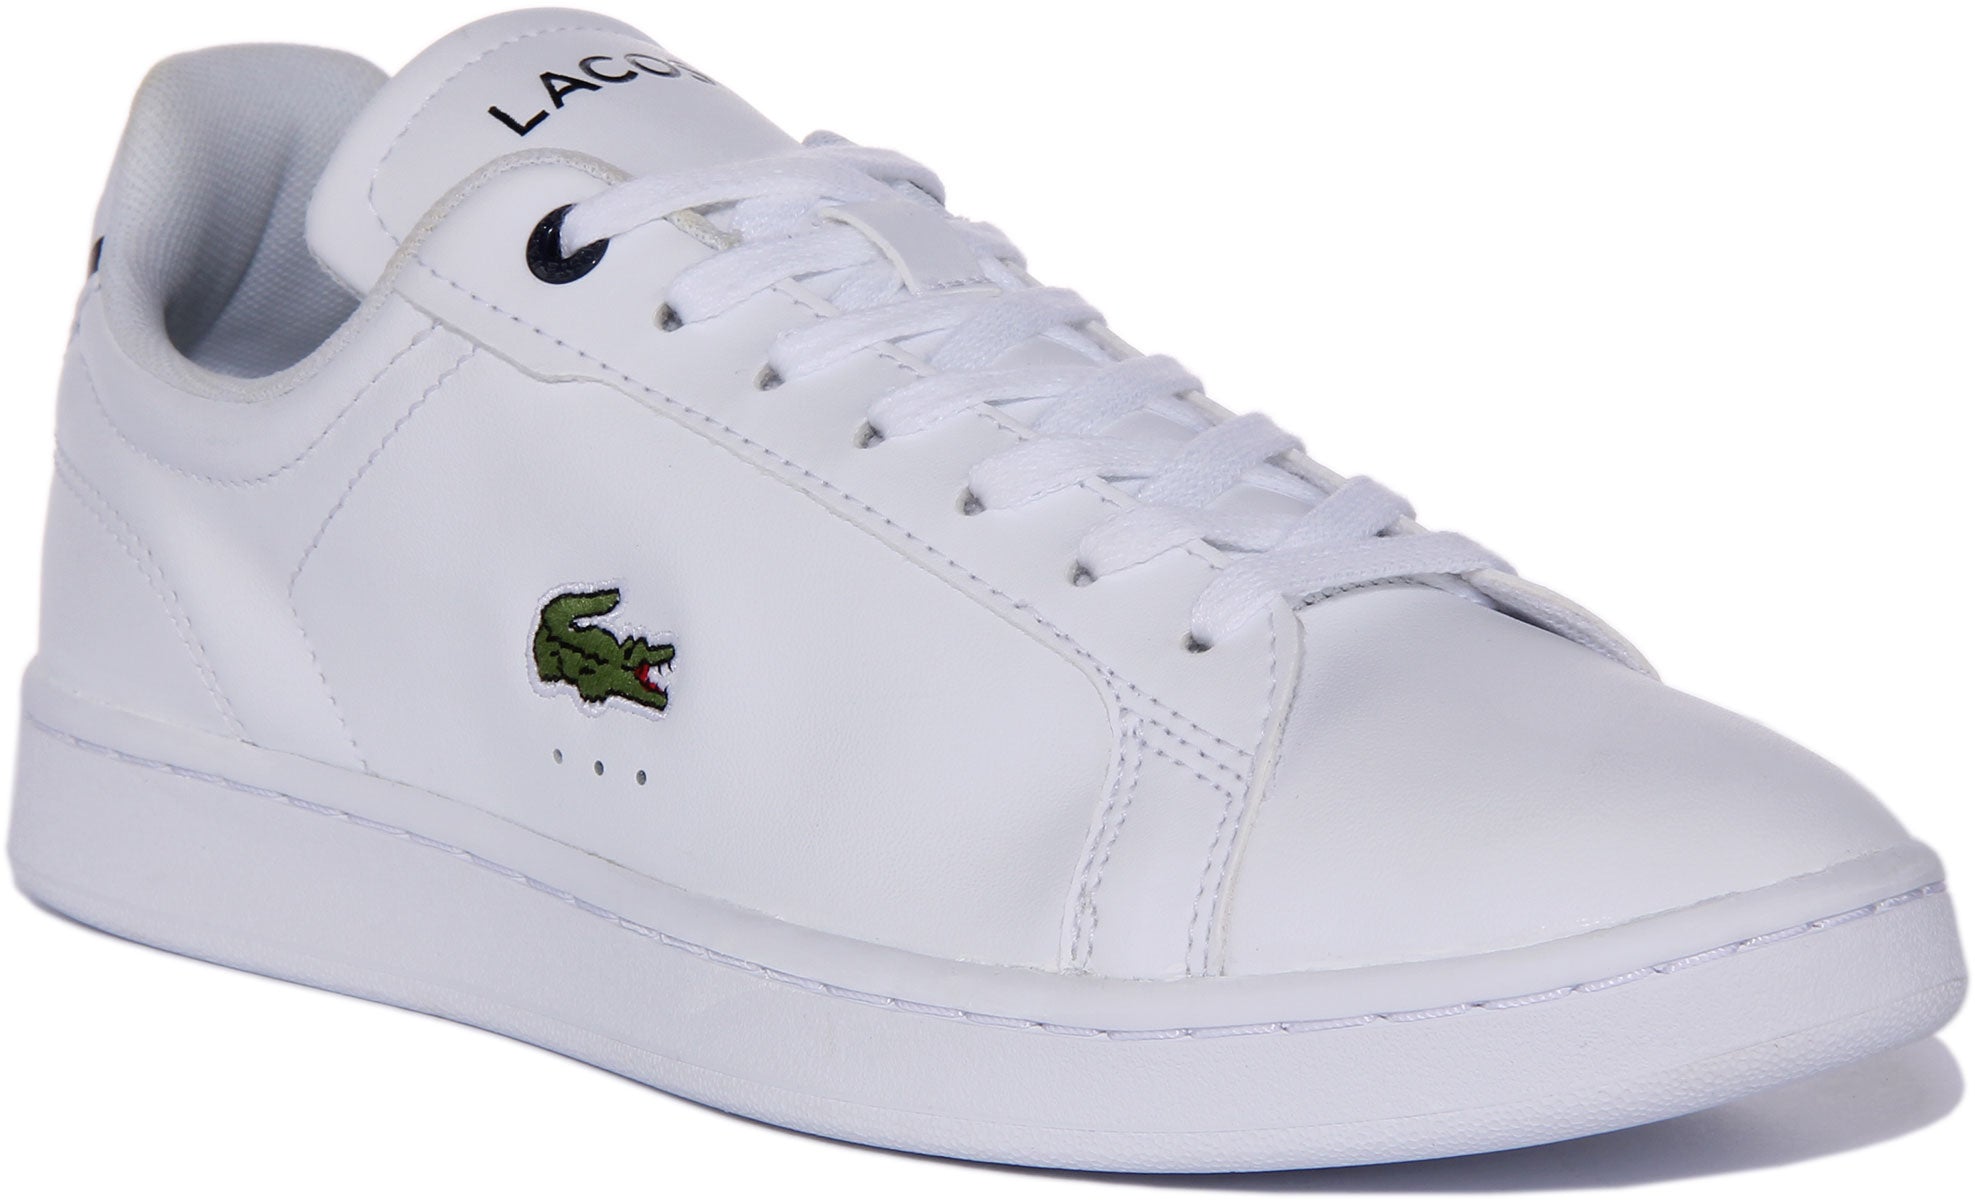 Lacoste Carnaby Pro B L23 SMA In White Navy For Men | Leather Shoes ...